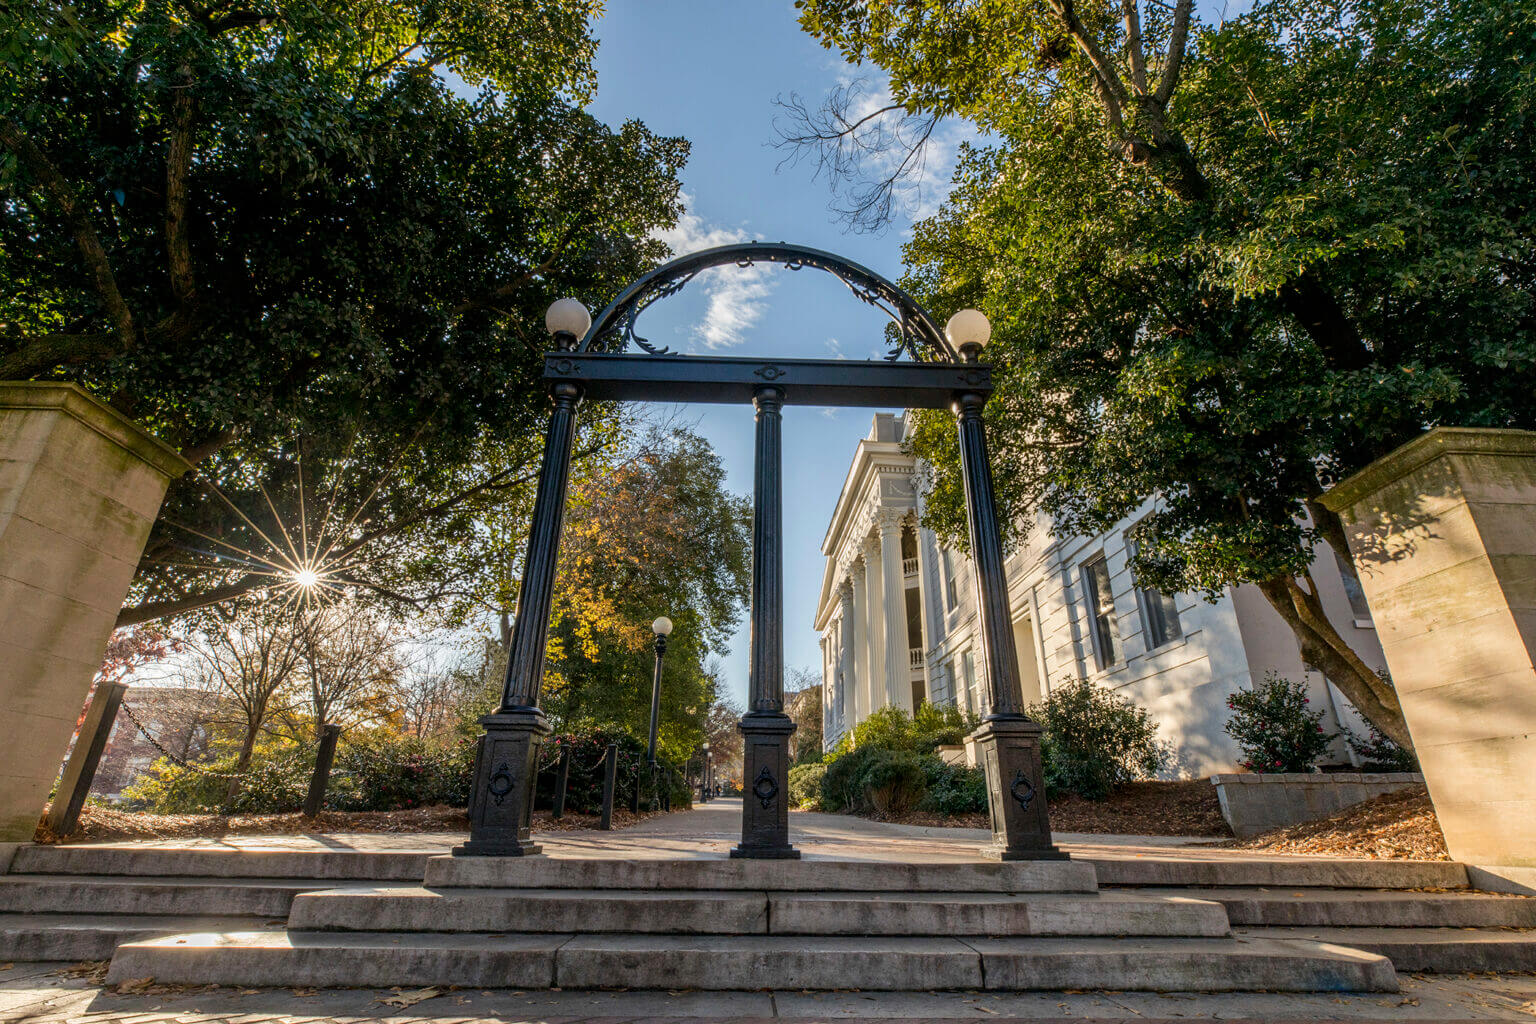 The UGA Arch, looking up from Broad Street in downtown Athens, Georgia.